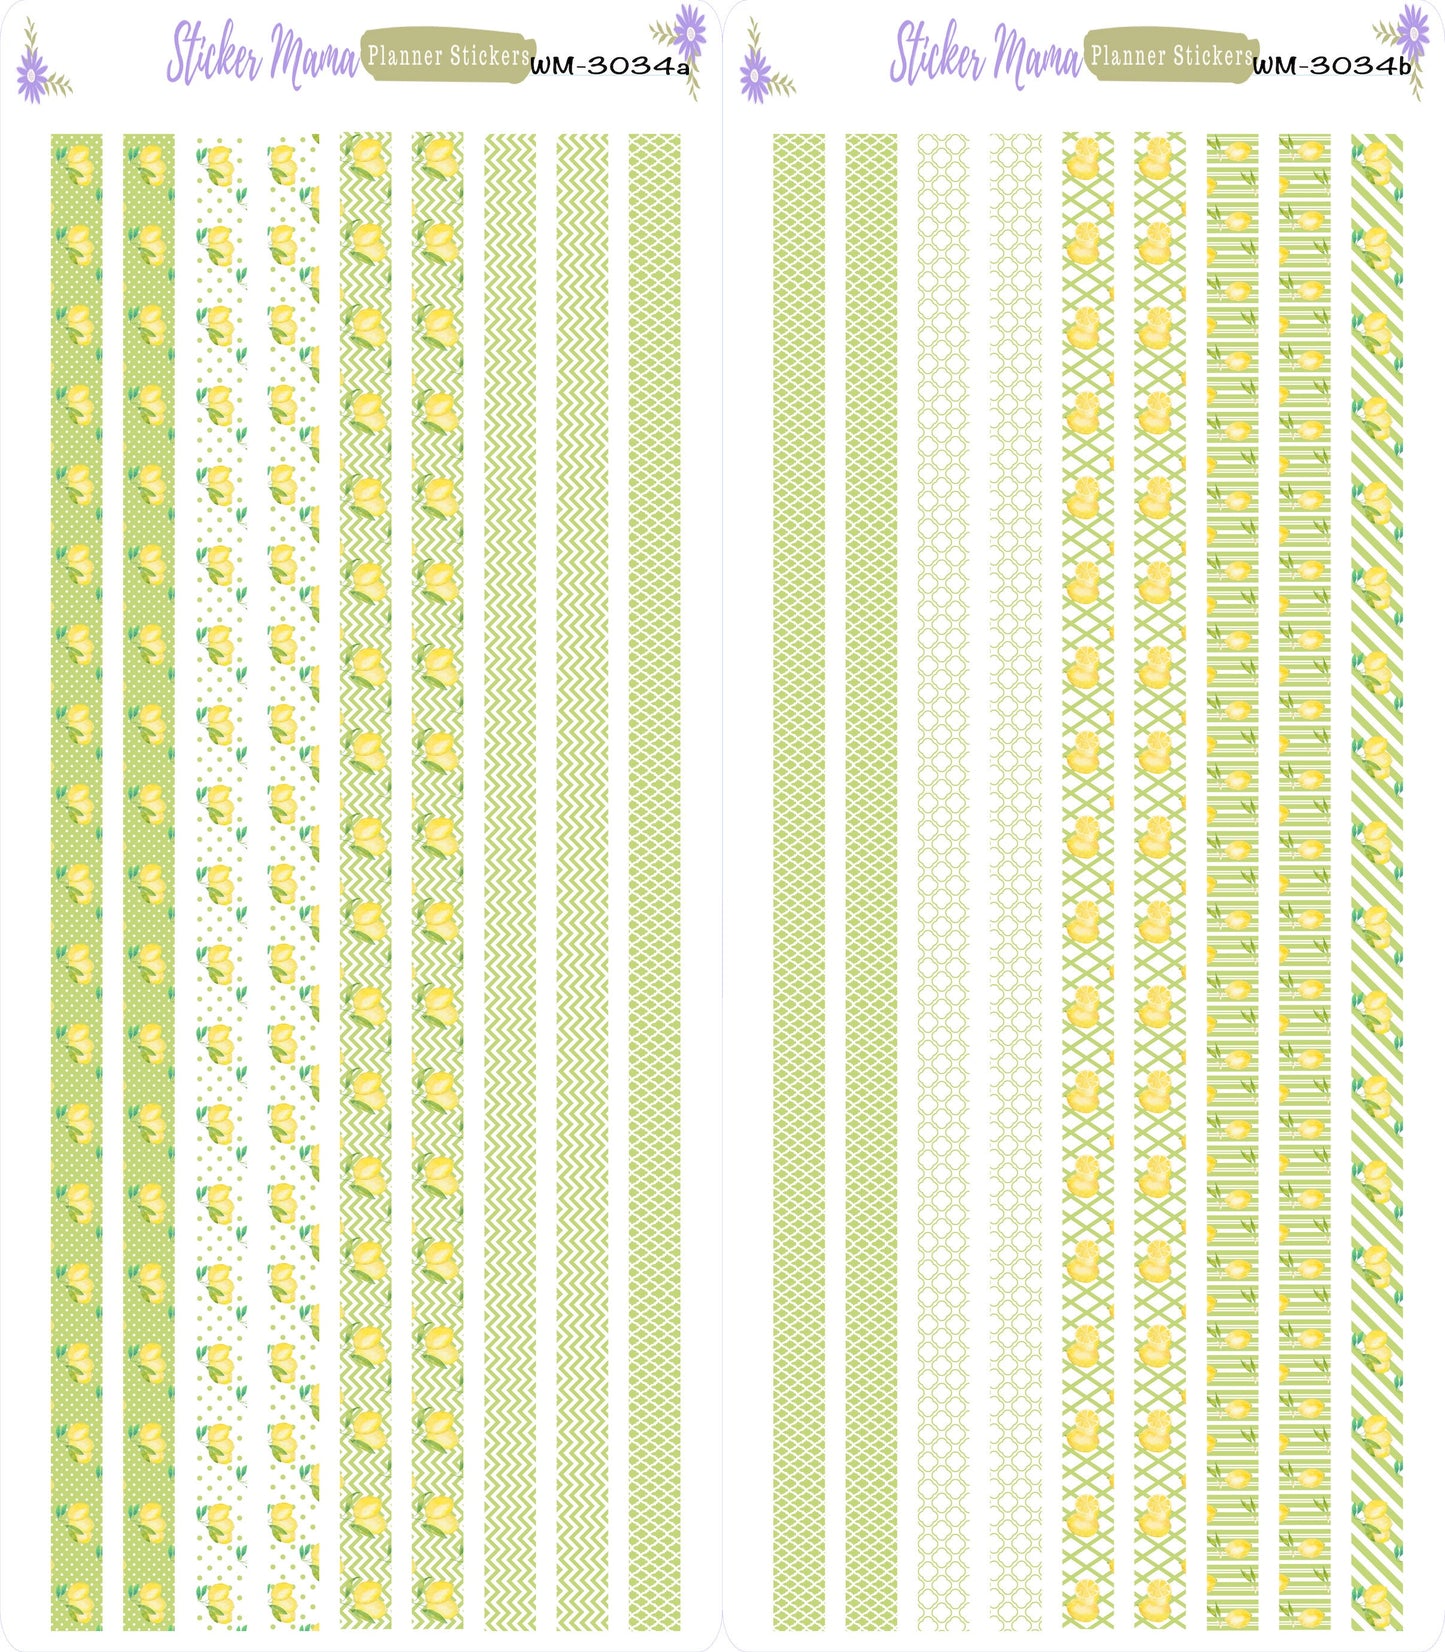 W-3034- Watercolor Lemons Washi Stickers || Planner Stickers || Washi for Planners